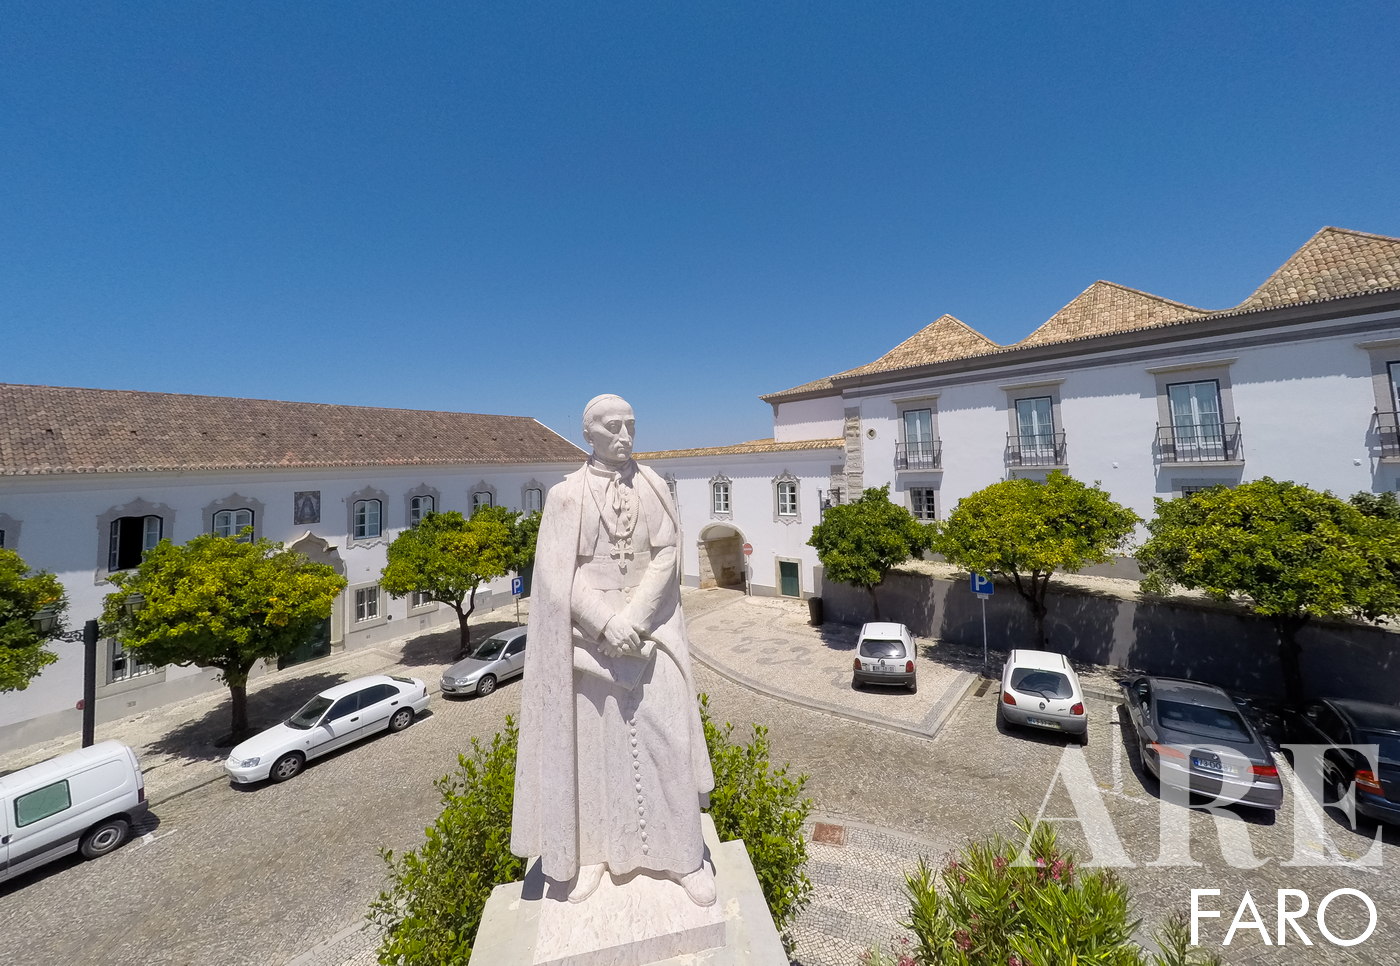 D. Francisco Gomes de Avelar was responsible for redesigning the city of Faro in the early 19TH century